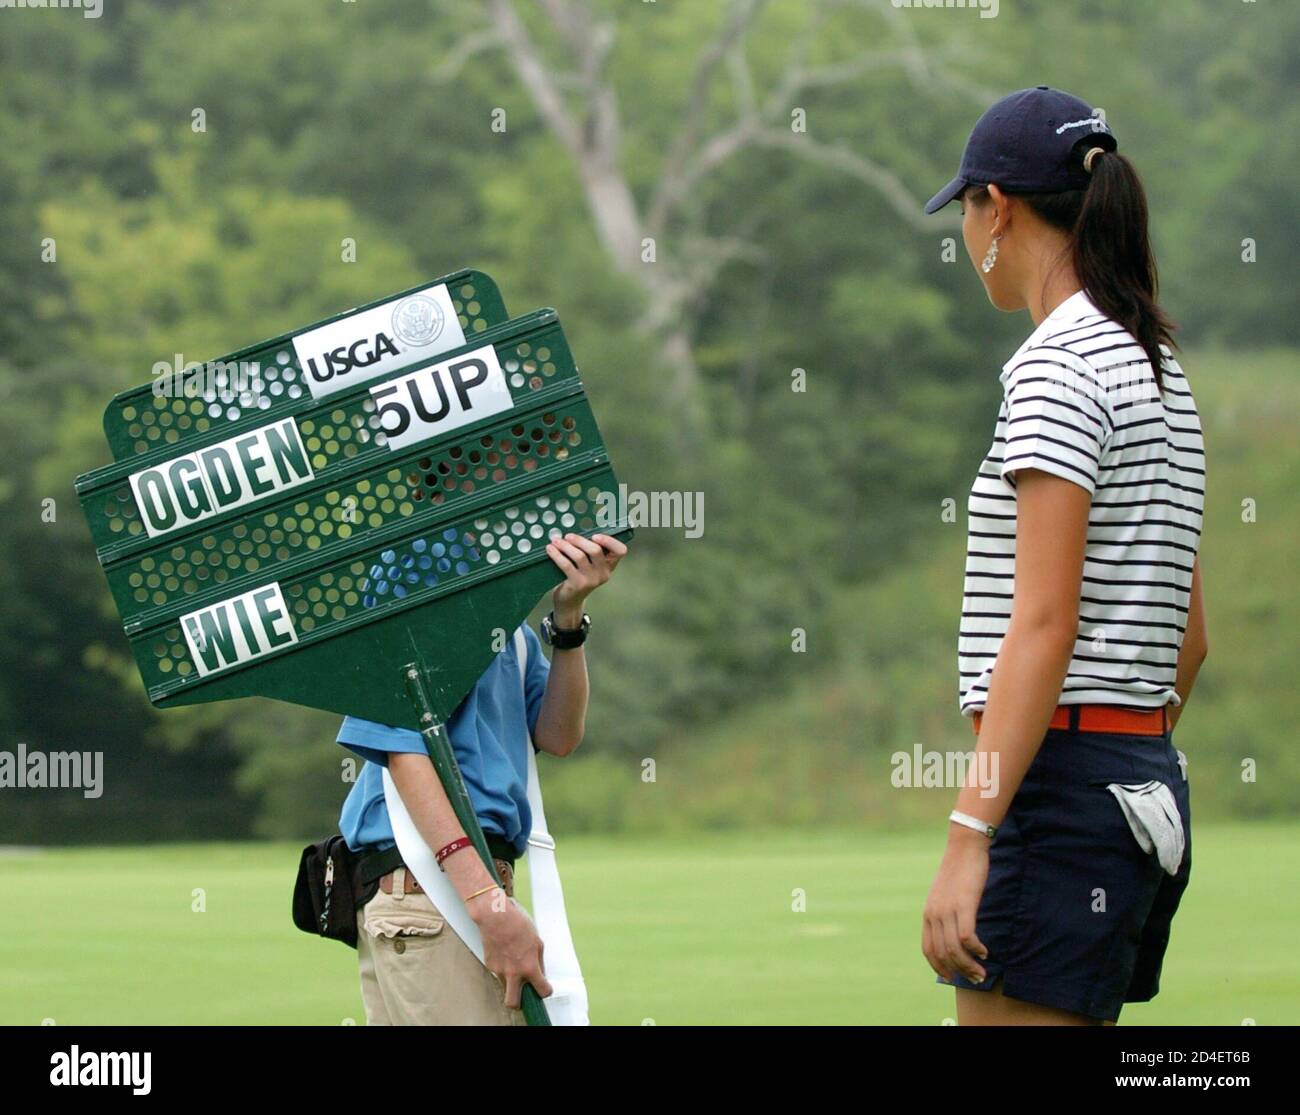 Michelle Wie looks at the standard with Clay Ogden's score defeating her on 14th green in their quarter-final round in Lebanon, Ohio.  Michelle Wie (R) of the U.S. looks at the standard with Clay Ogden's score defeating her 5 and 4 on the 14th green in their quarter-final round of match play in the 2005 United States Amateur Public Links Championship at Shaker Run Golf Club in Lebanon, Ohio, July 15, 2005. REUTERS/John Sommers II Stock Photo